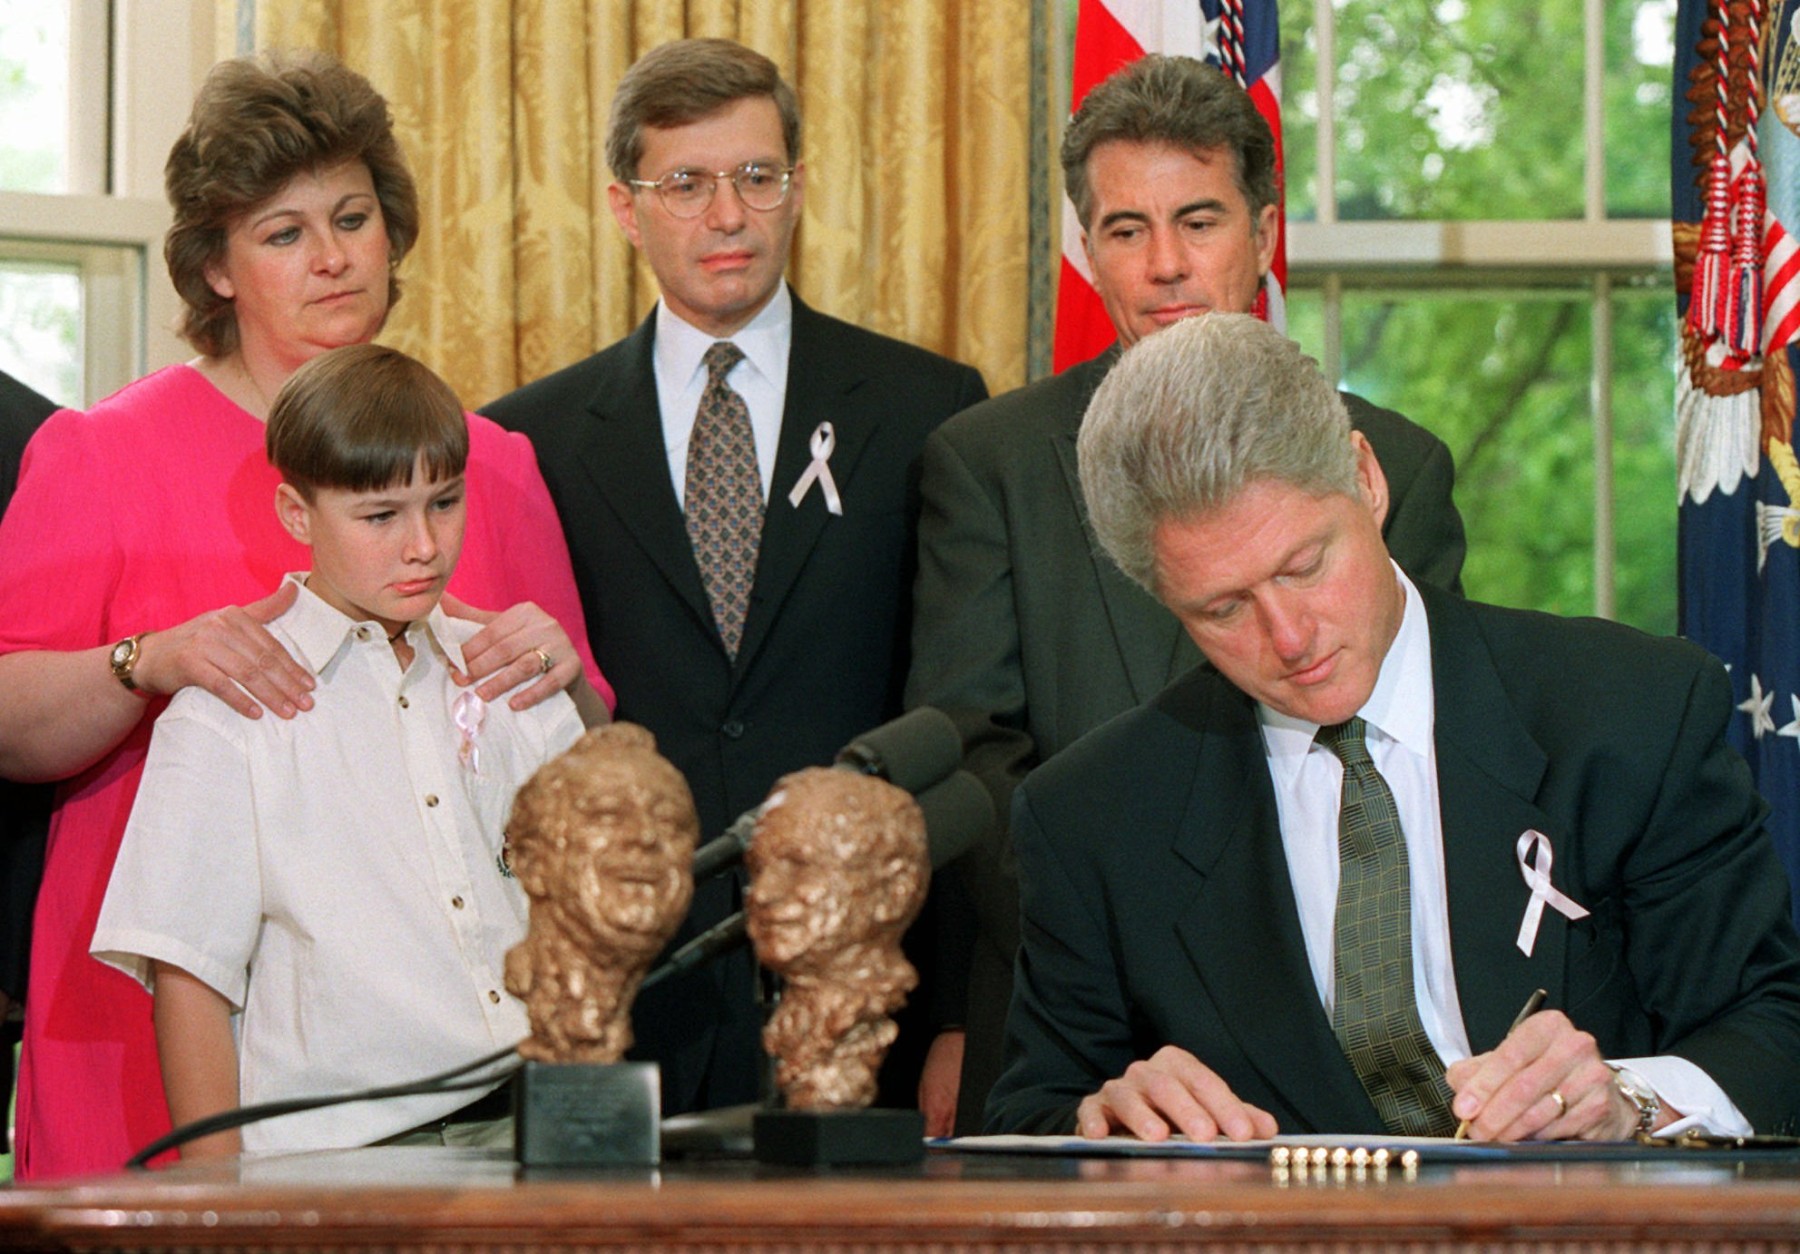 President Clinton signs the "Megan's Law," named after the late Megan Kanka of Hamilton Township, N.J., Friday May 17, 1996 in the Oval Office of the White House. Looking on from left are, Megan's mother Maureen, brother Jeremy, 7, Rep. Dick Zimmer, R-N.J., and John Walsh, host of the "America's Most Wanted" television show. (AP Photo/Denis Paquin)